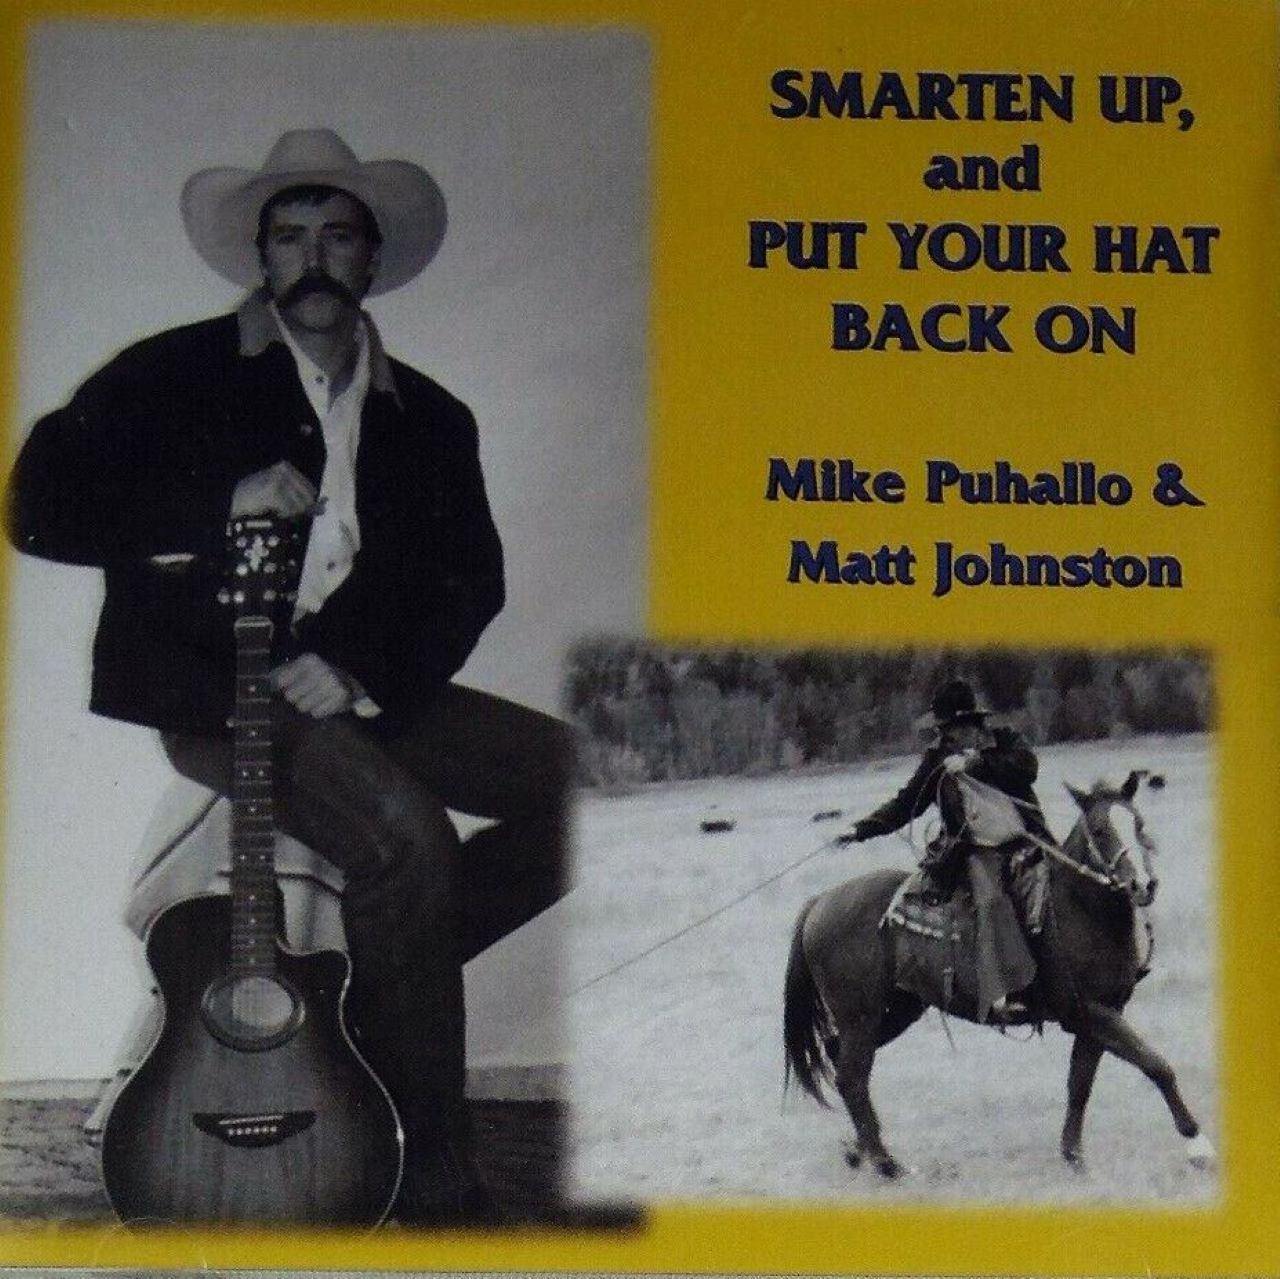 Matt Johnson & Mike Puhallo – Smarten Up And Put Your Hat Back On cover album